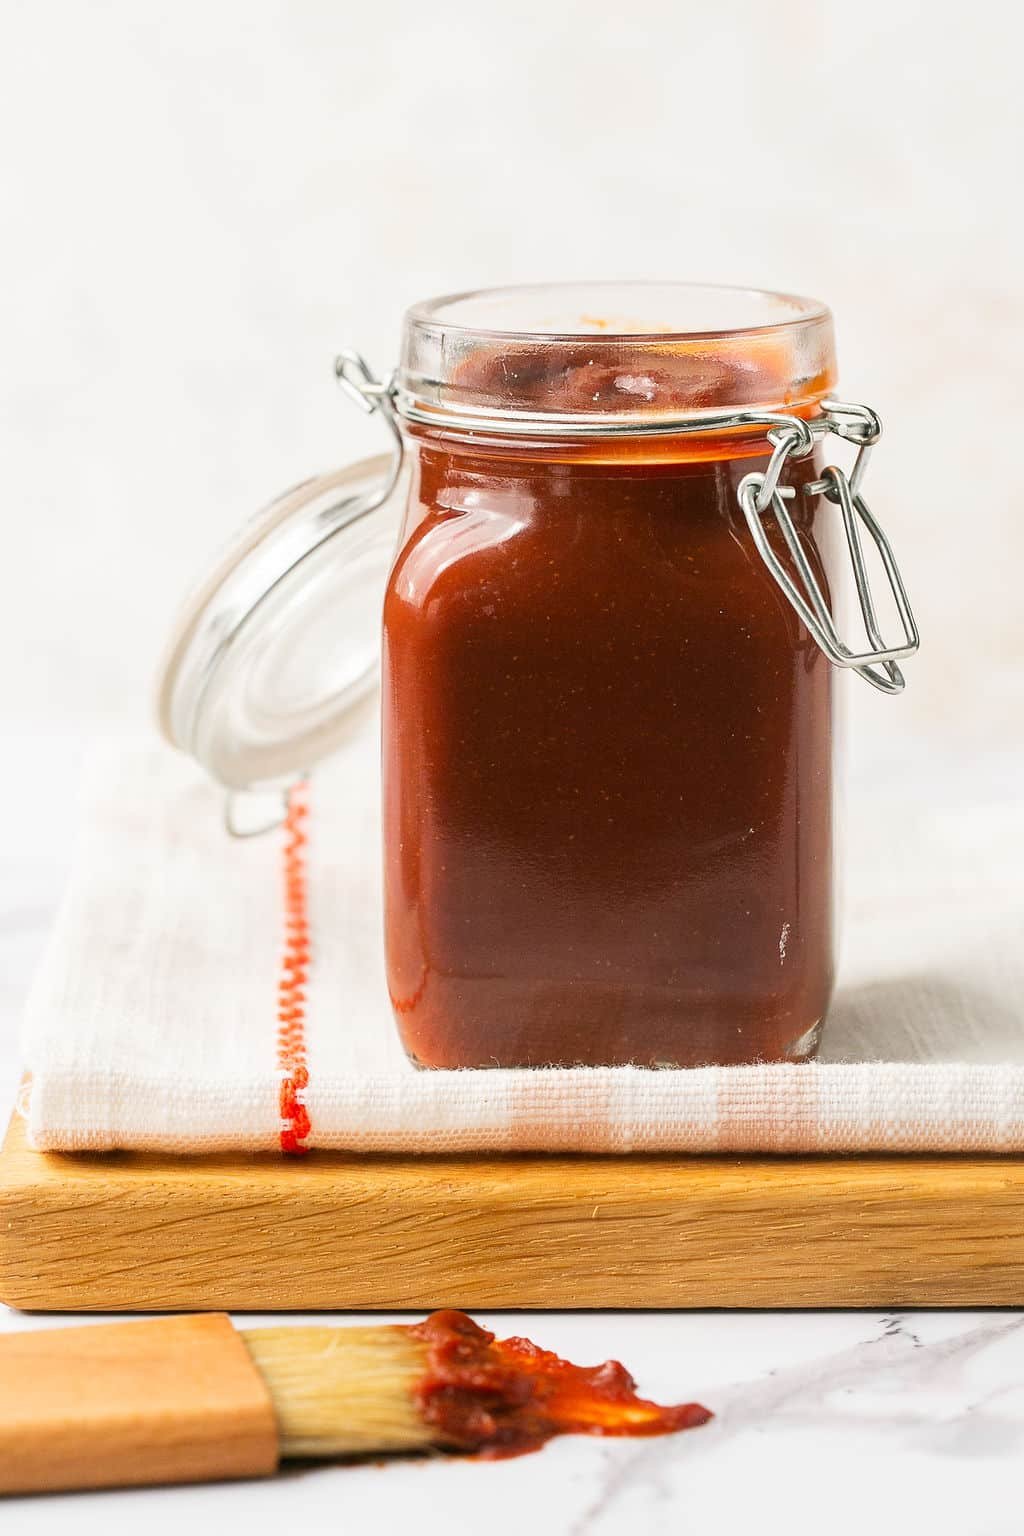 This Low Sugar BBQ Sauce is sweet, smoky, tangy & super tasty! Made low in sugar with wholesome ingredients. Incredibly easy to make too! Perfect for salads, grilling, baking, or the crockpot! Vegan + Gluten Free + Low CalorieThis Low Sugar BBQ Sauce is sweet, smoky, tangy & super tasty! Made low in sugar with wholesome ingredients. Incredibly easy to make too! Perfect for salads, grilling, baking, or the crockpot! Vegan + Gluten Free + Low Calorie